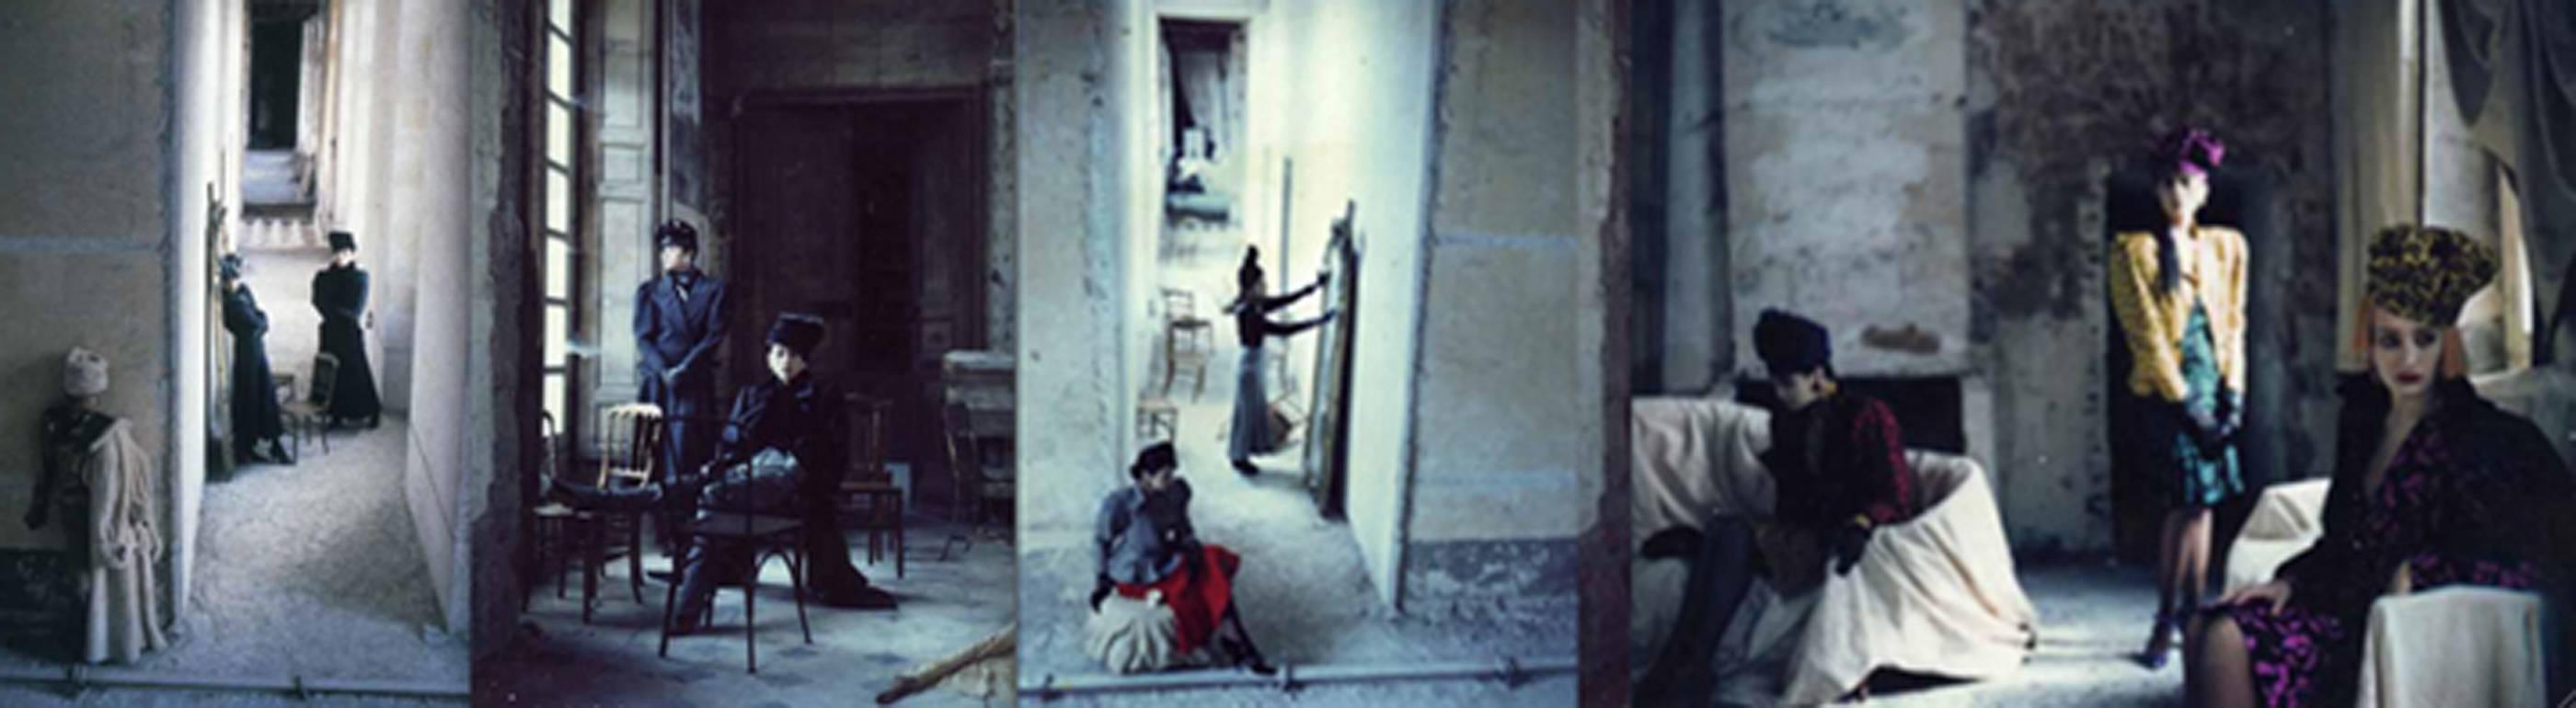 Deborah Turbeville Color Photograph - Anh Duong and Marie-Sophie in Emanuel Ungaro, VOGUE, Chateau Raray, France